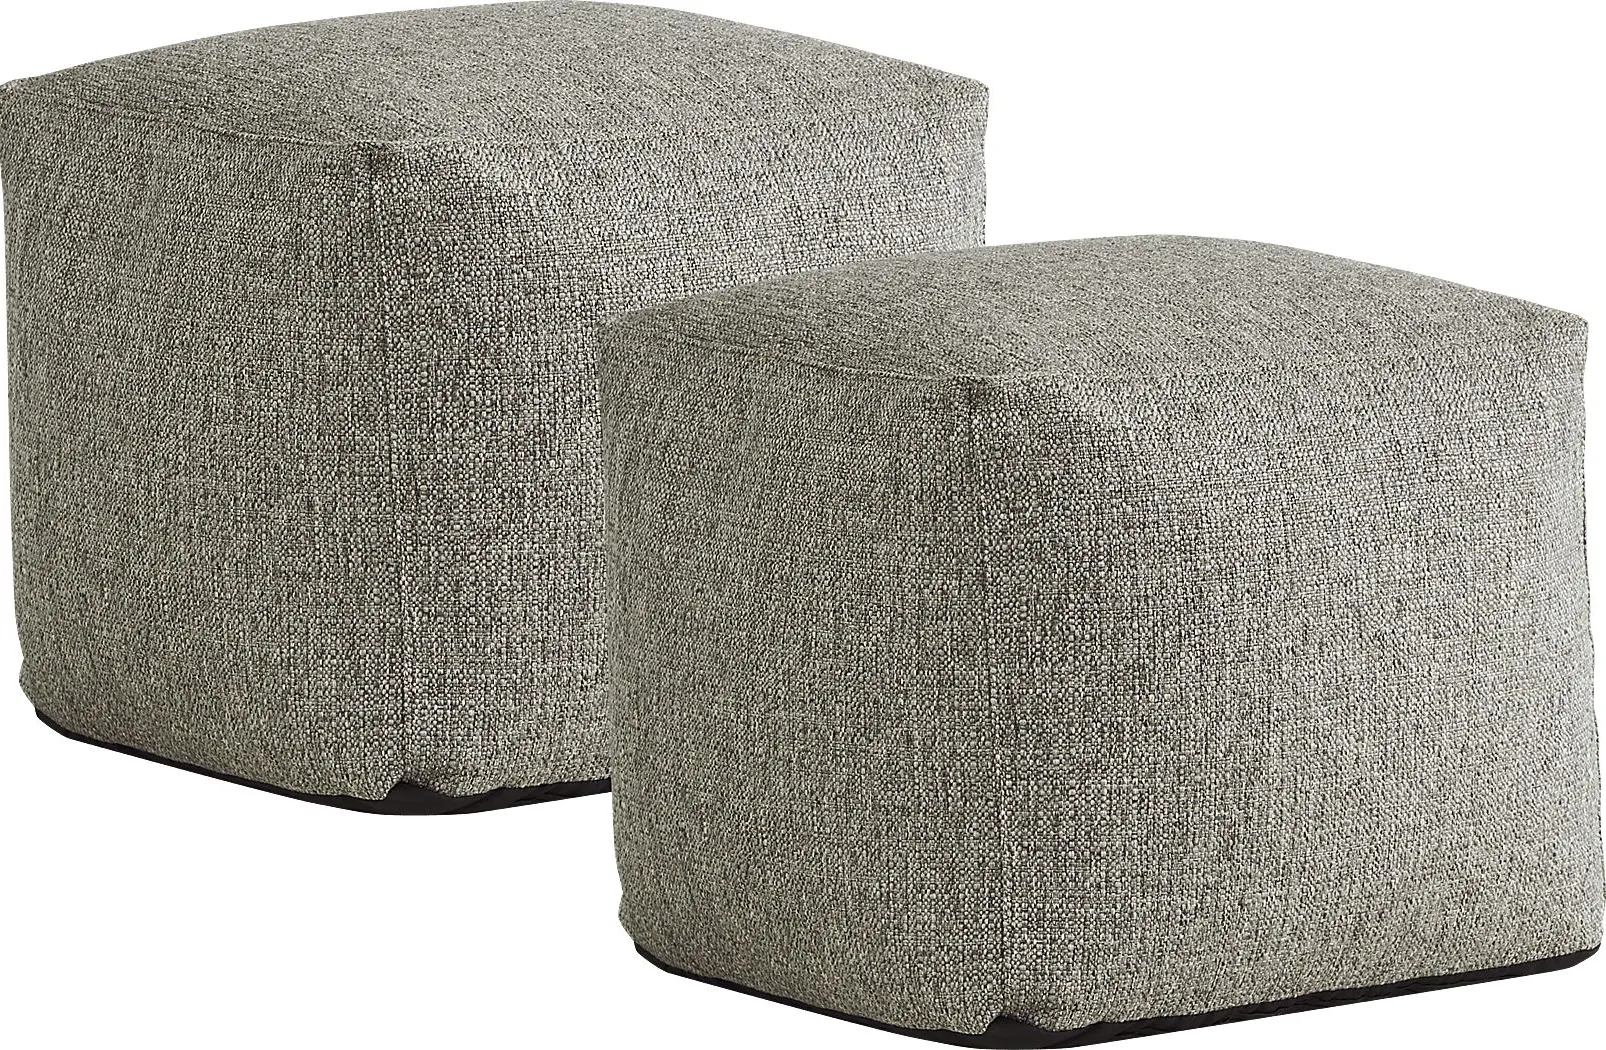 Hanover Gray Textured Accent Pouf, Set of 2